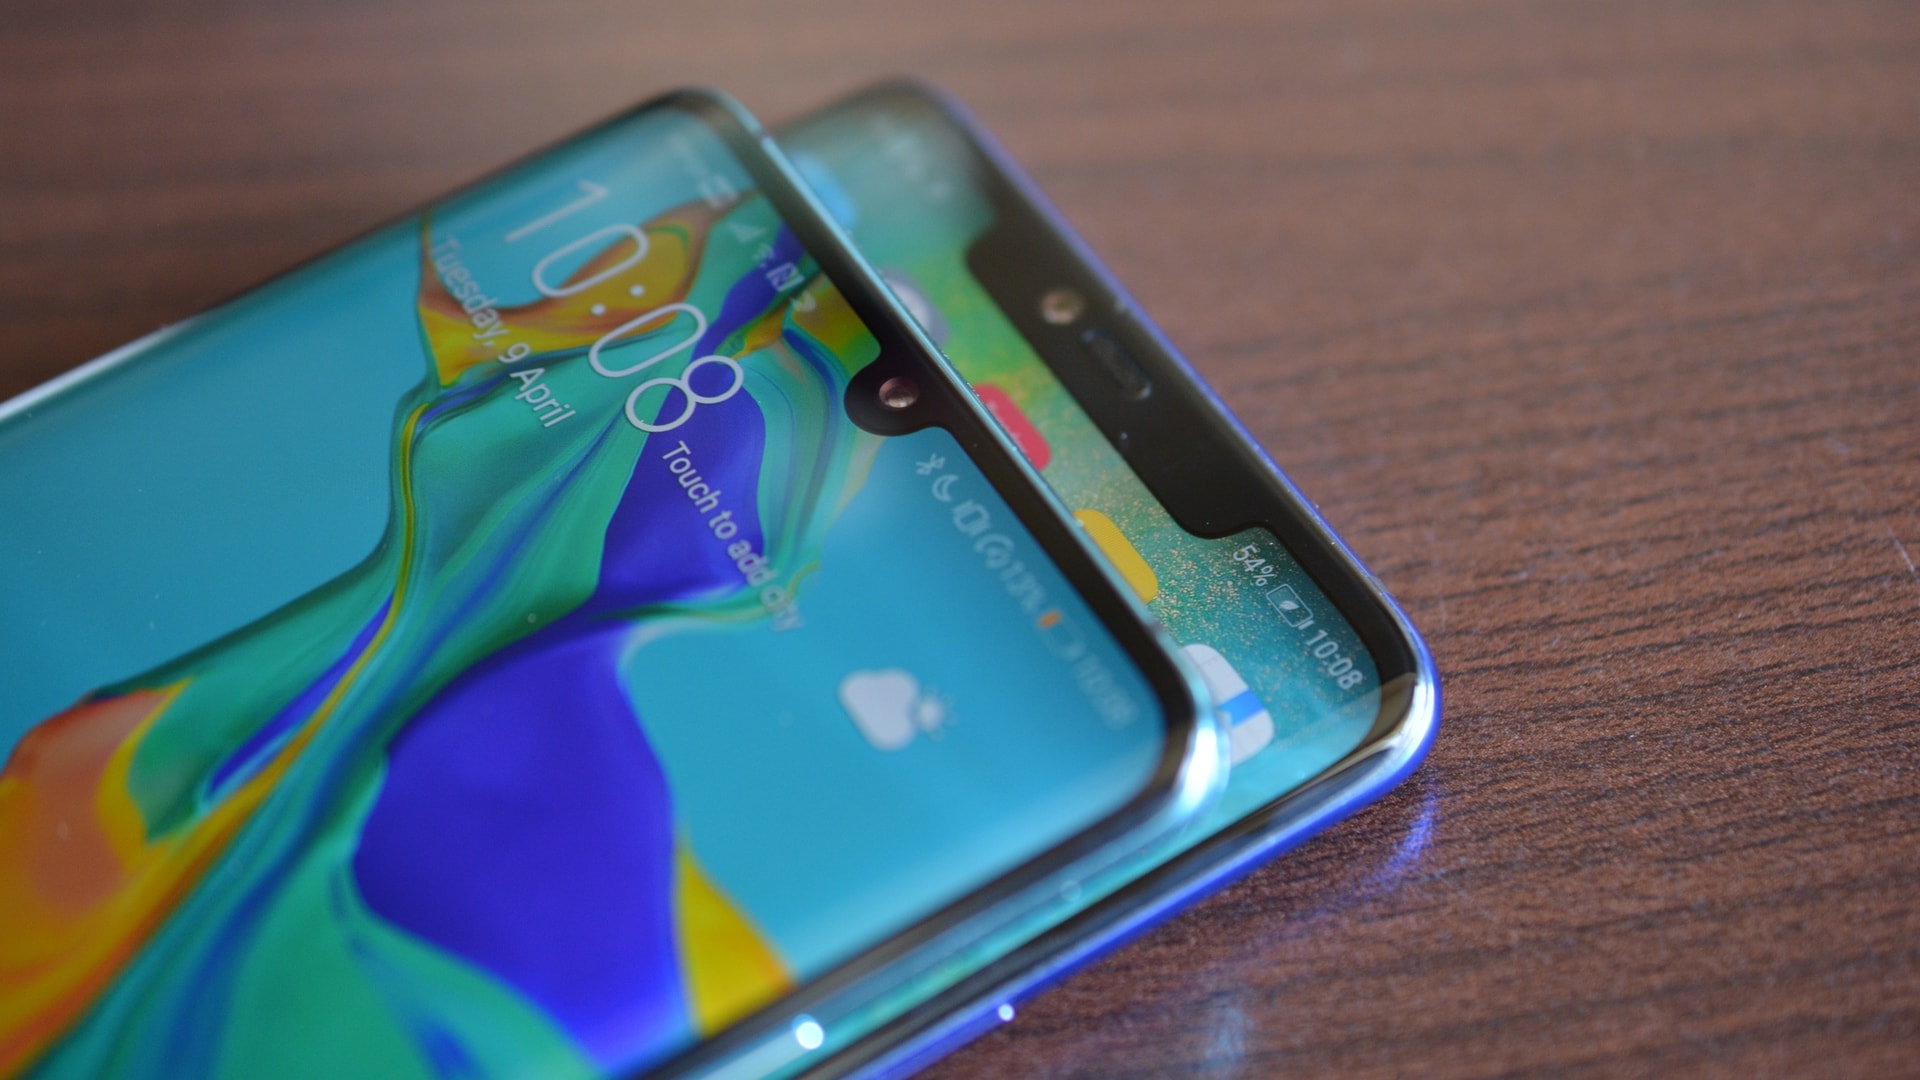 huawei p30 pro vs huawei mate 20 pro side by side notch from the side